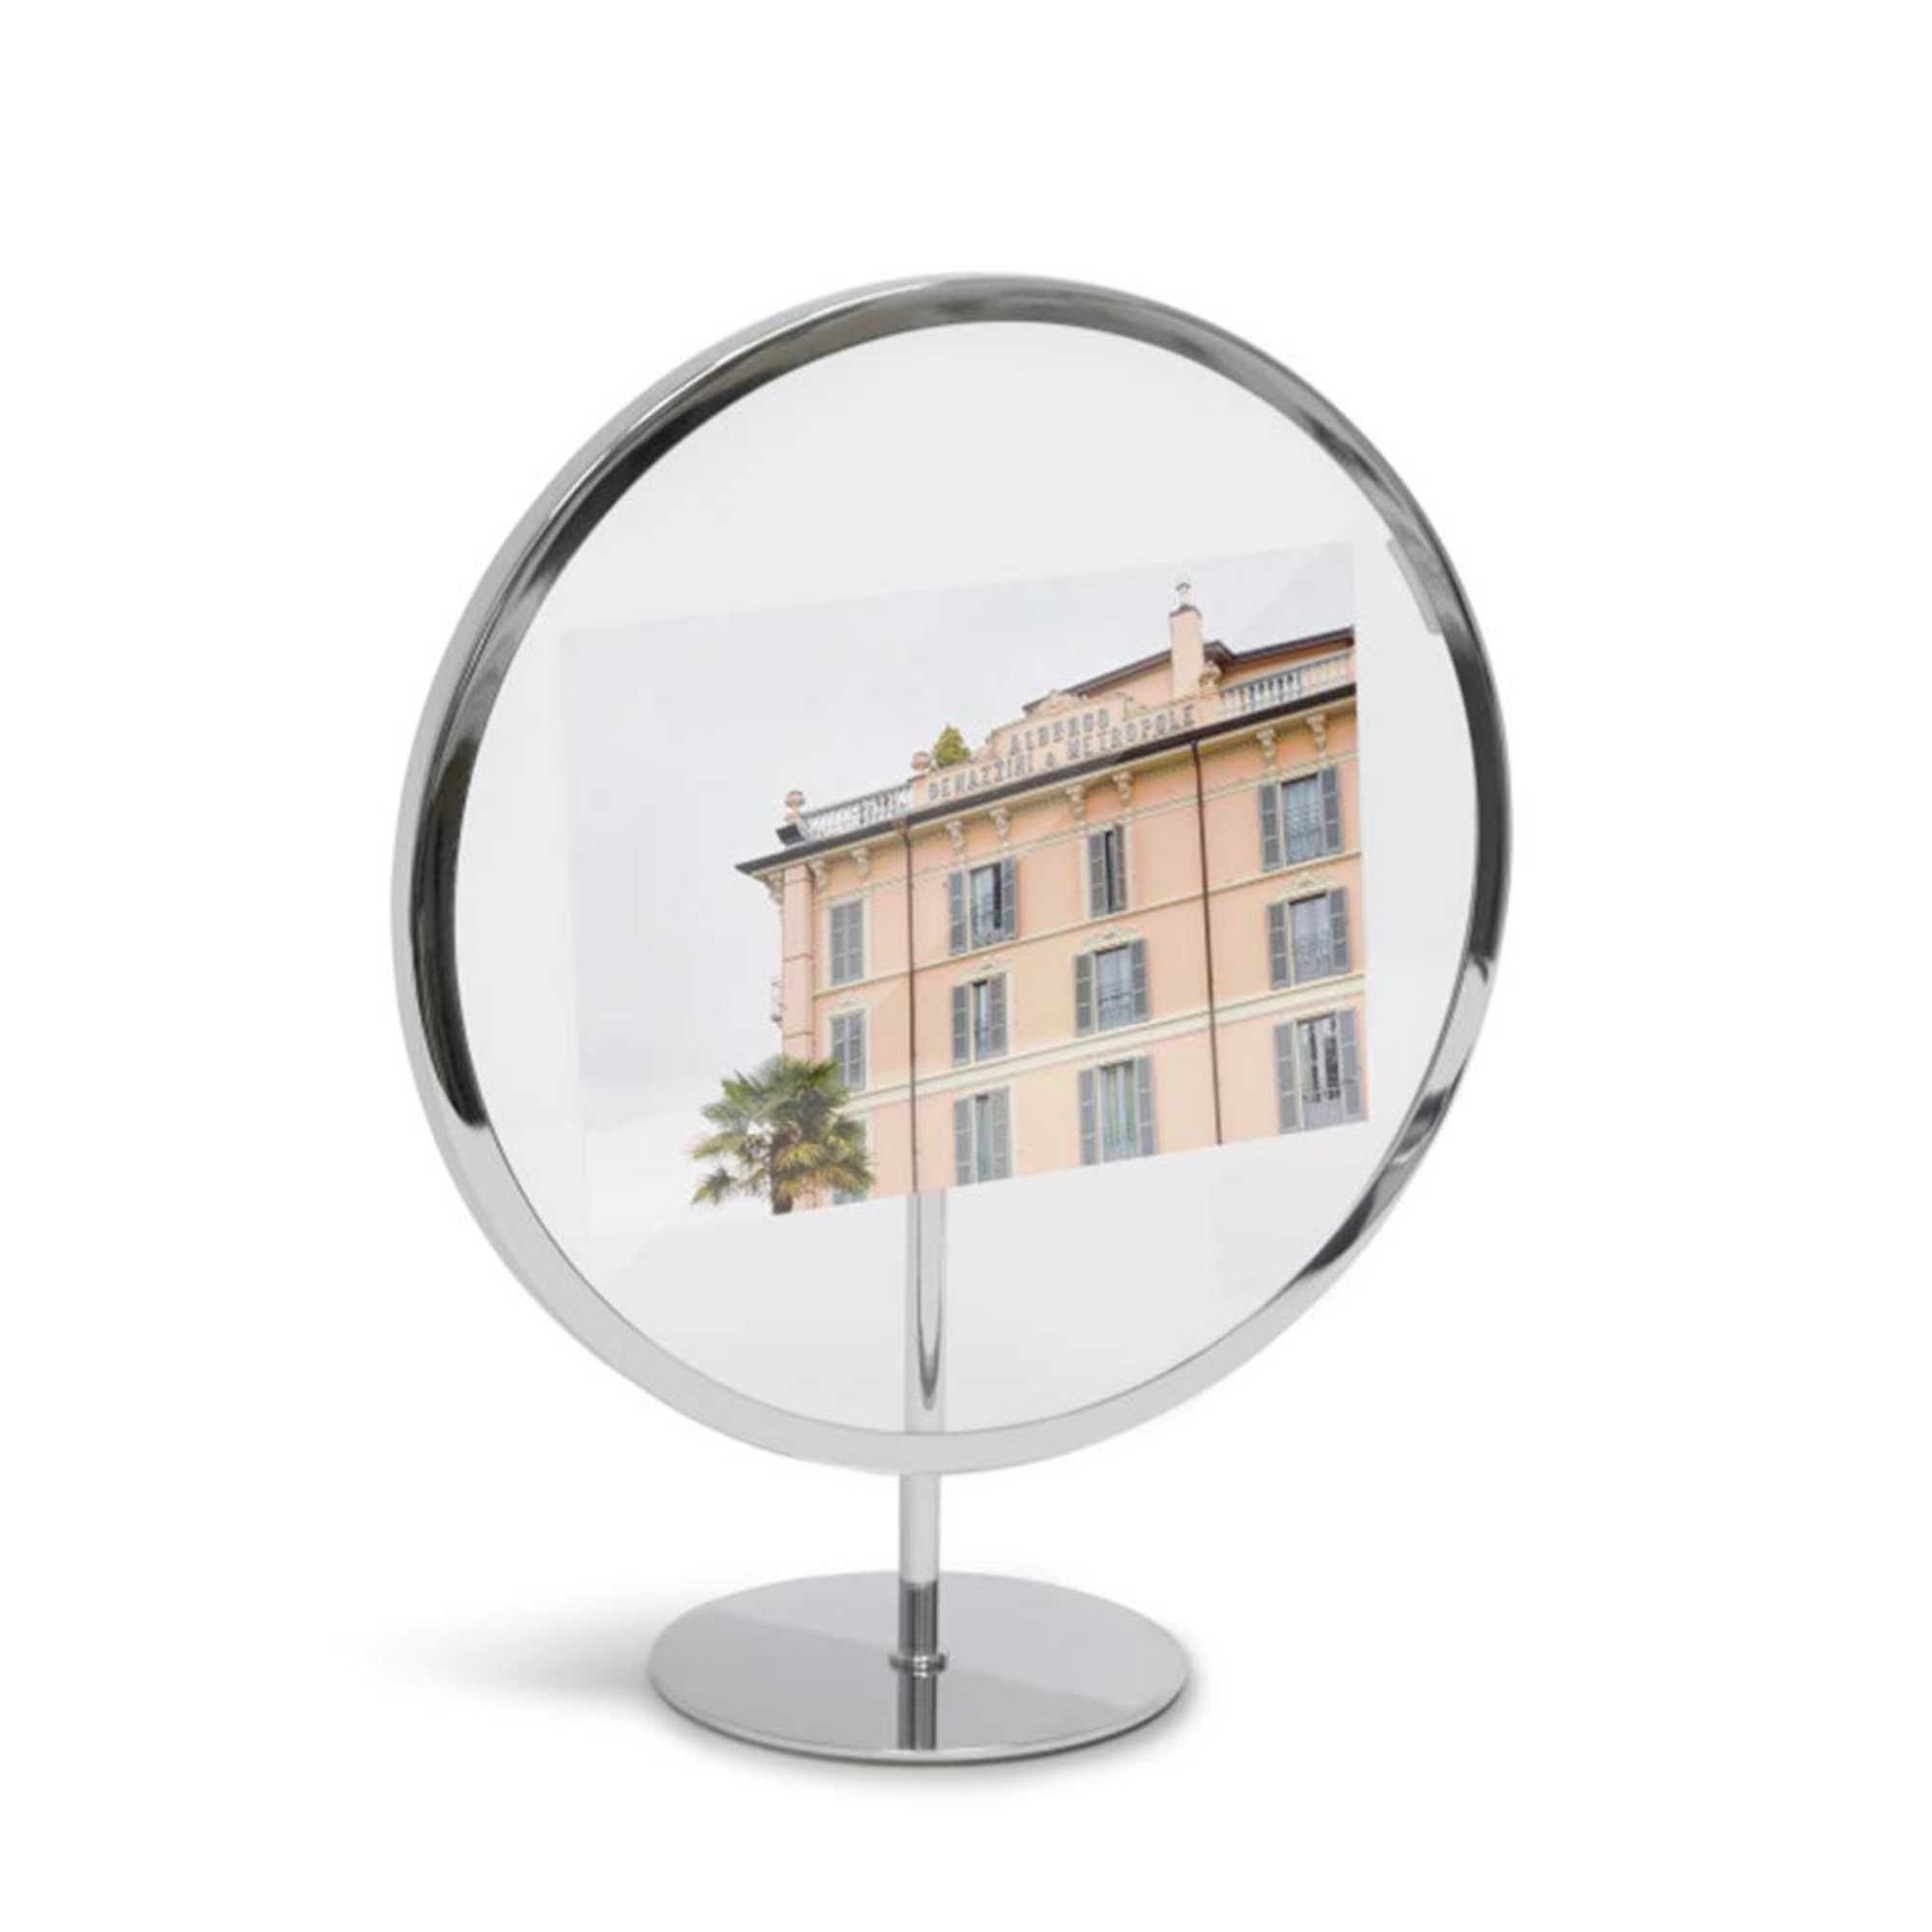 Umbra Infinity round picture frame 5X7, chrome